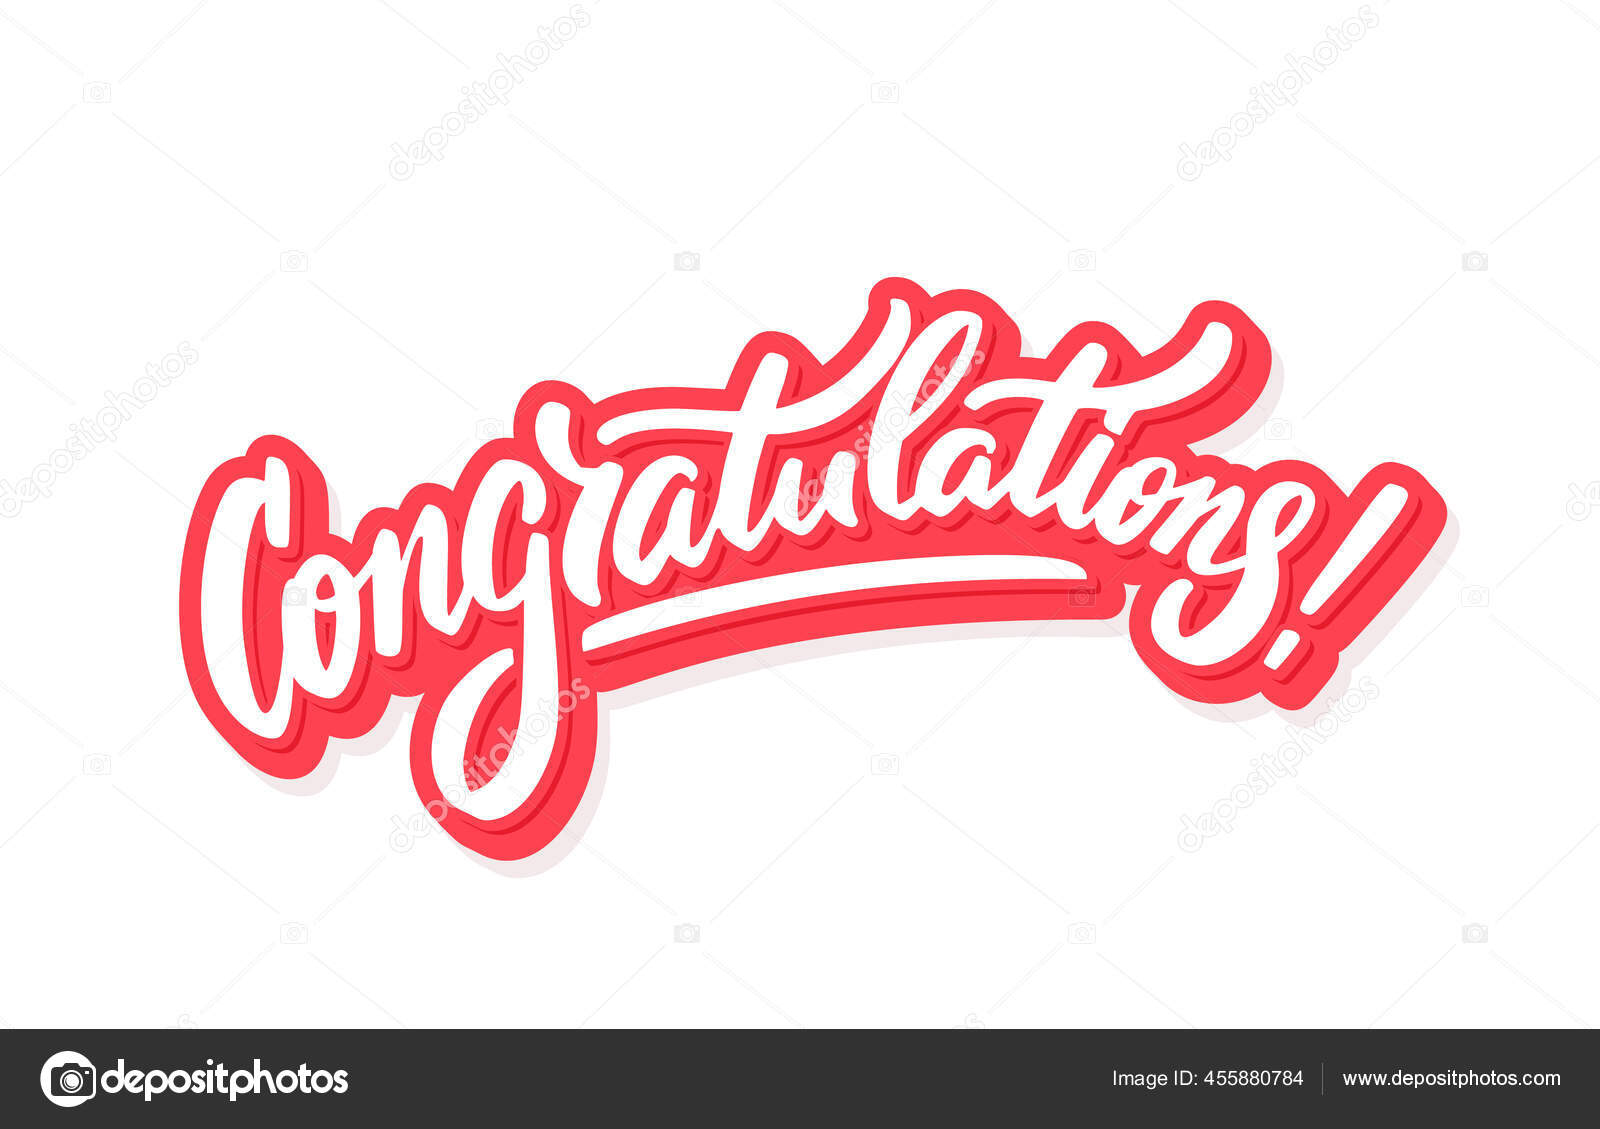 Congratulations Vector Hand Drawn Lettering Card Stock Vector Image